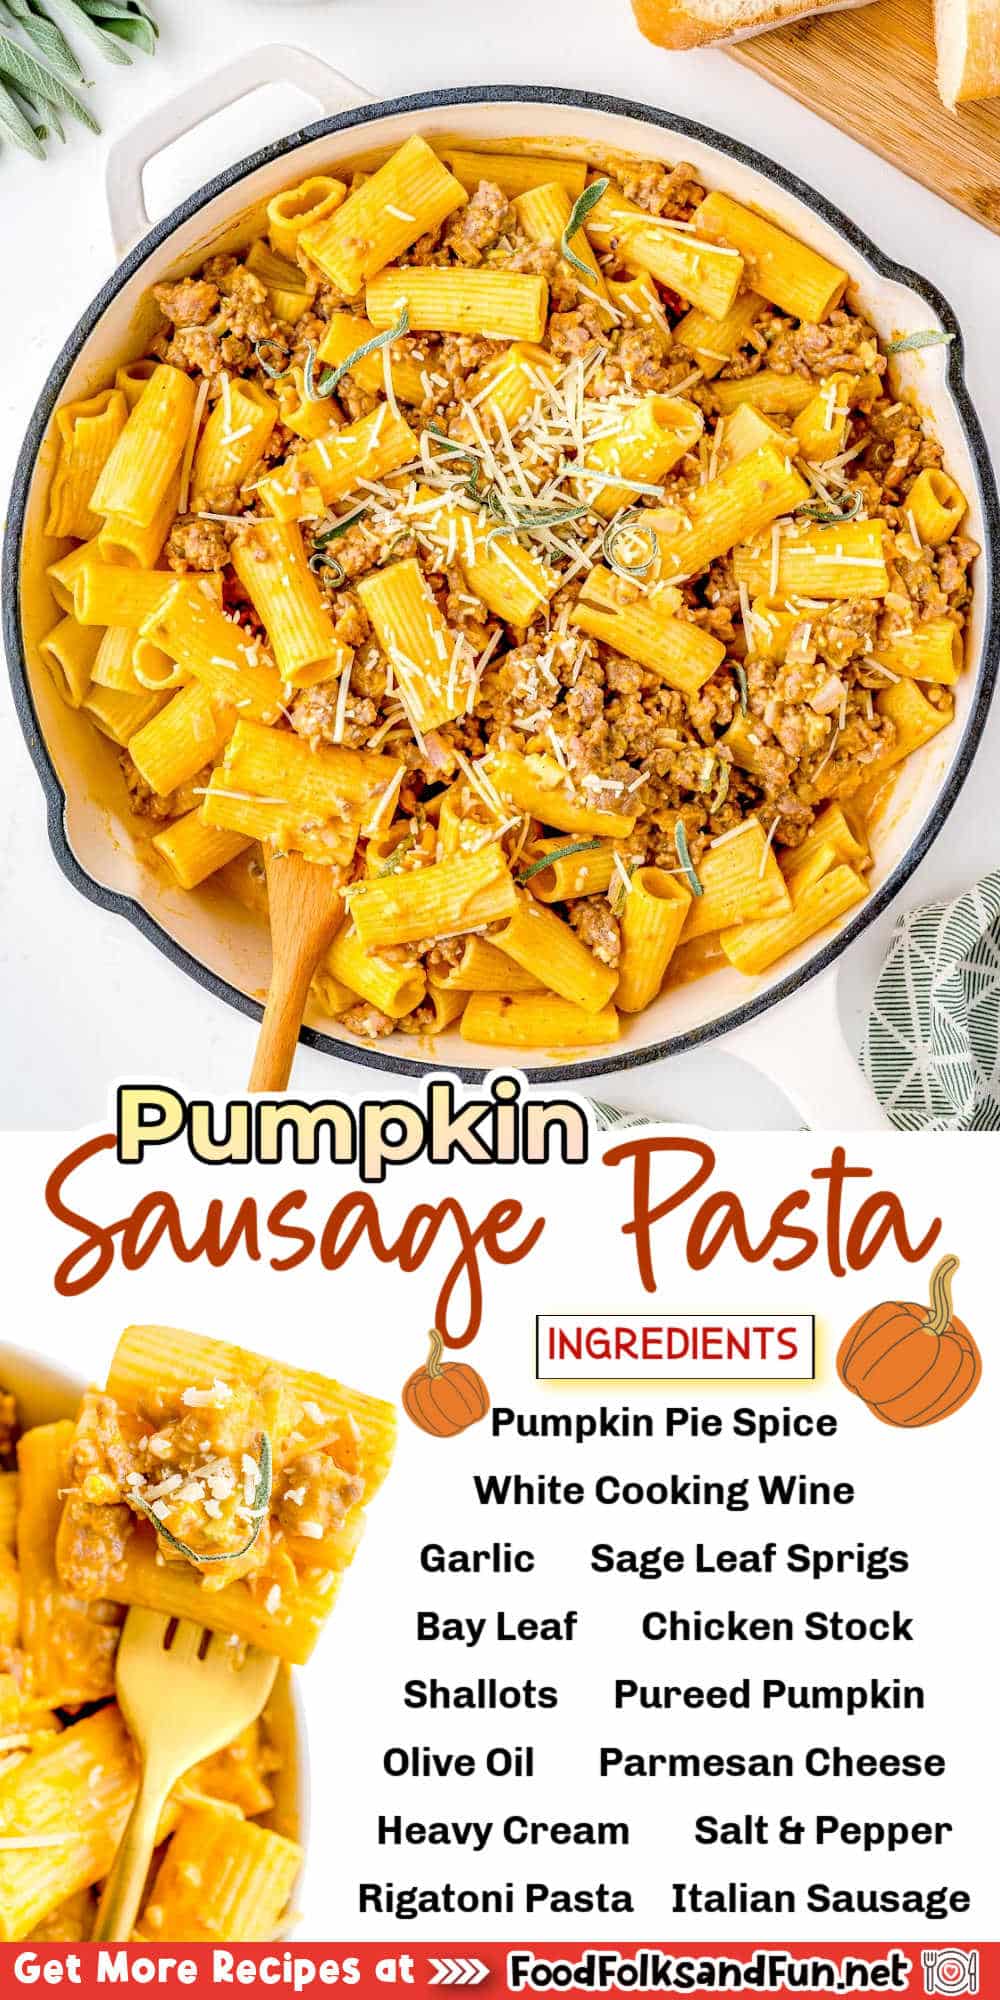 This Pumpkin Sausage Pasta with sage is the perfect comfort food for fall! It's creamy, spicy, and so flavorful. Plus, it's on your table in just 25 minutes! via @foodfolksandfun